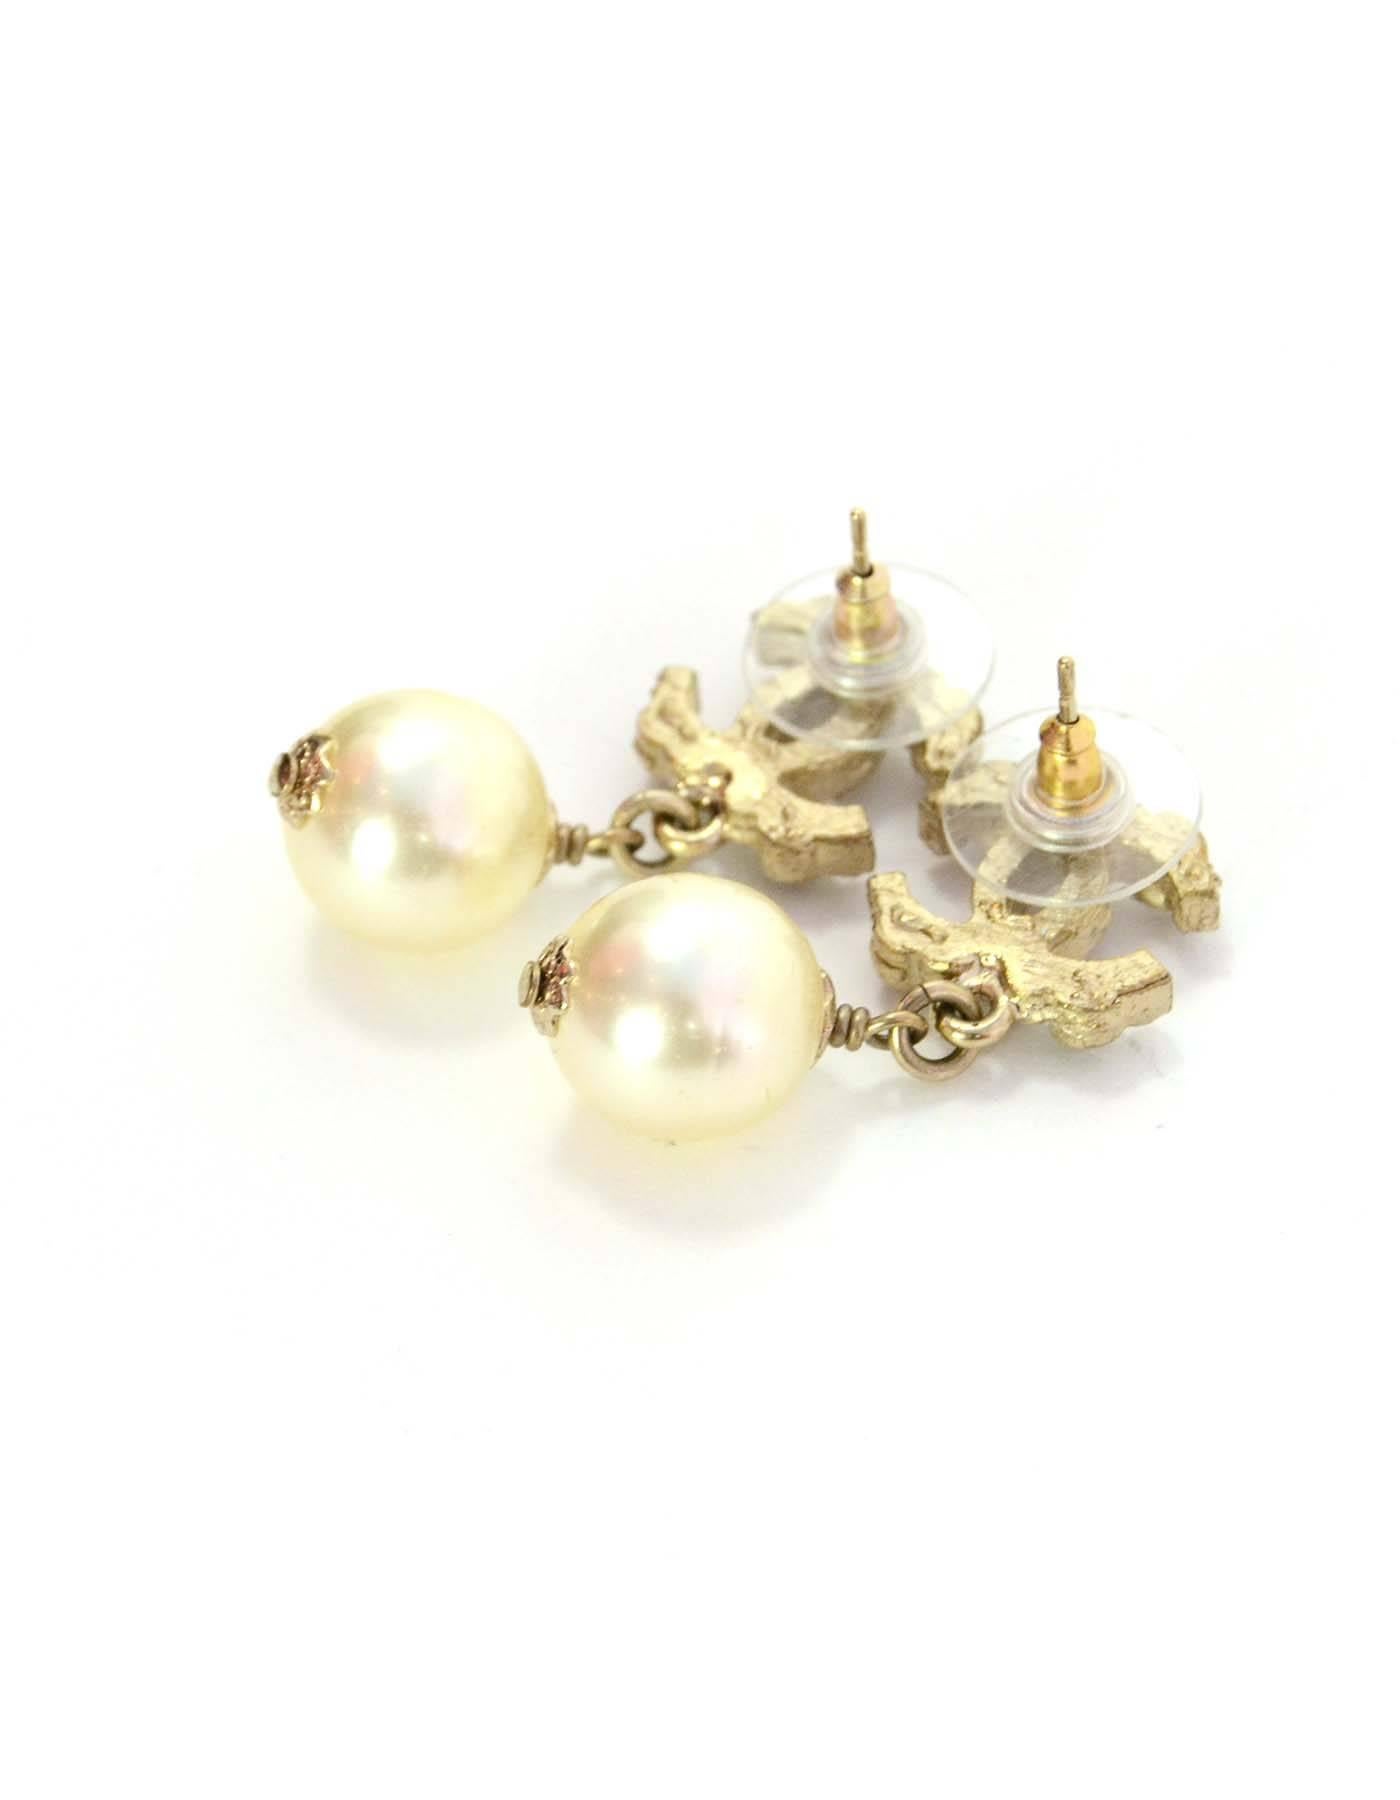 Chanel Crystal & Pearl CC Drop Earrings
Features different sized crystals throughout CC's
Color: Pale goldtone and ivory
Materials: Metal, crystal and faux pearl
Closure: Pierced back
Overall Condition: Excellent pre-owned condition with the